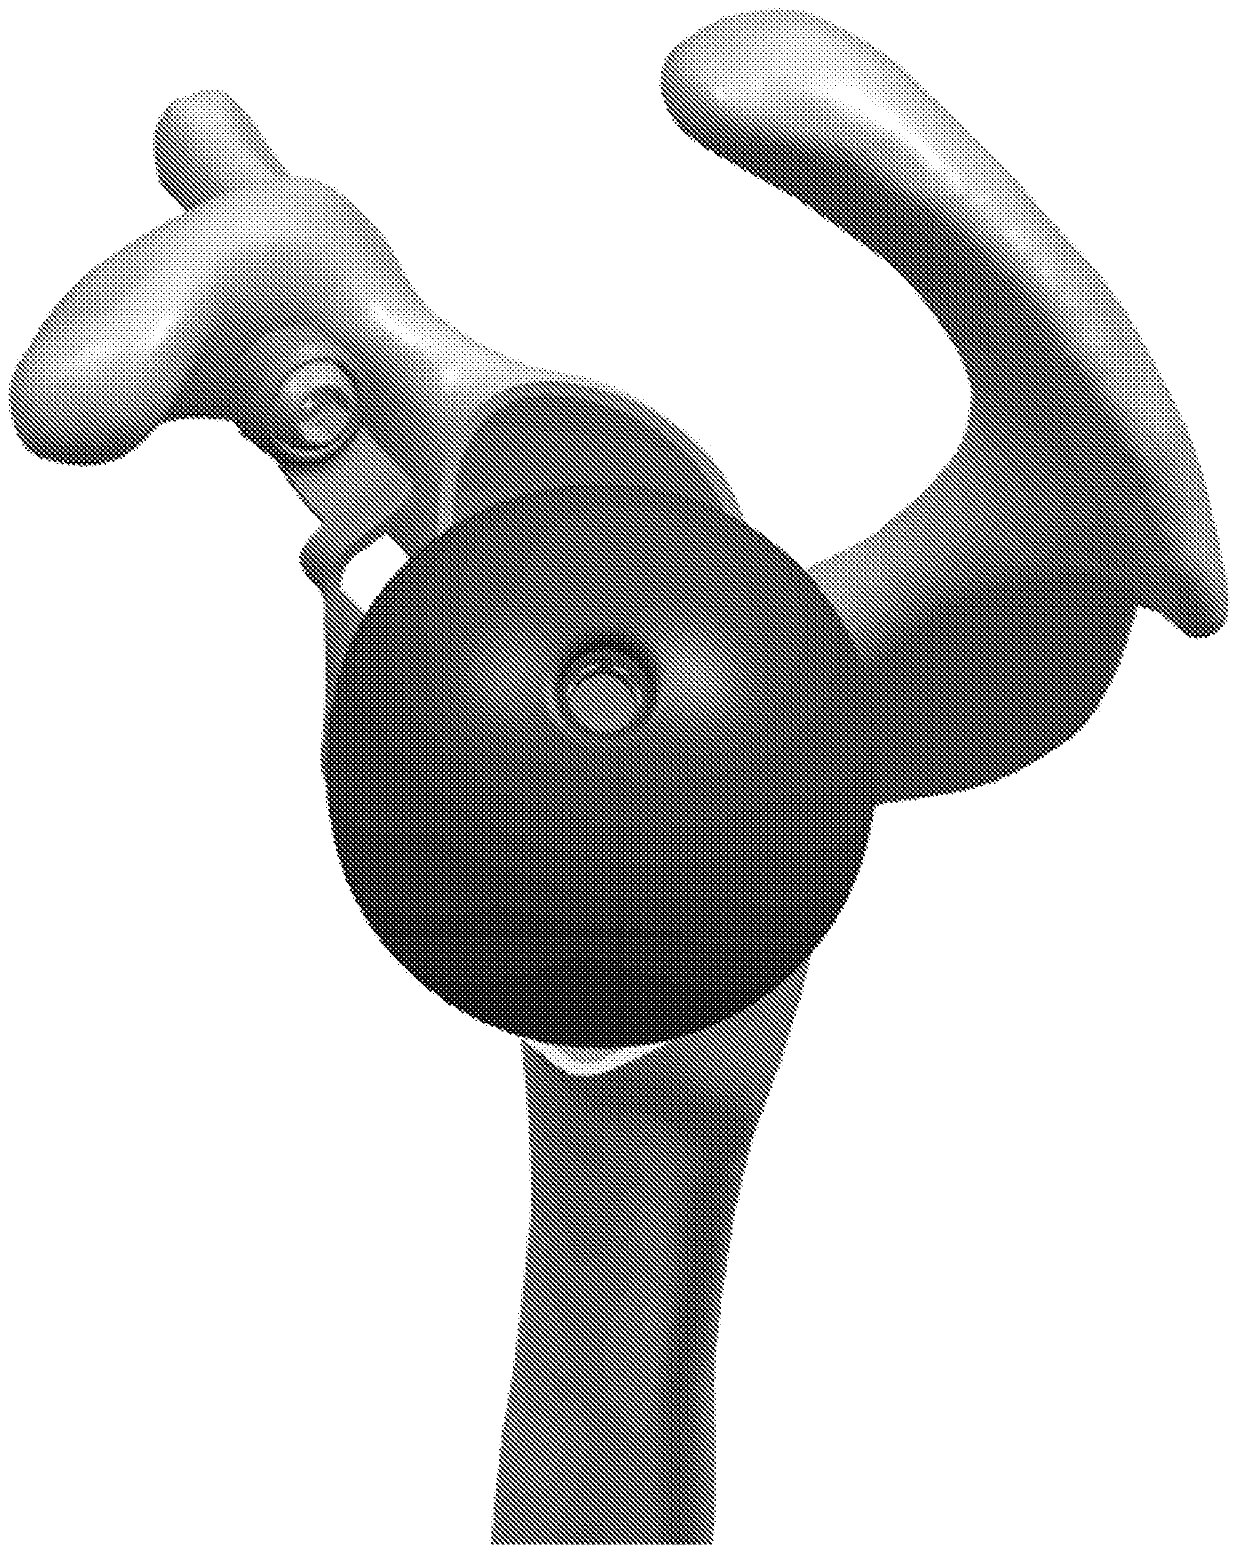 Platform rtsa glenoid prosthesis with modular attachments capable of improving initial fixation, fracture reconstructions, and joint biomechanics